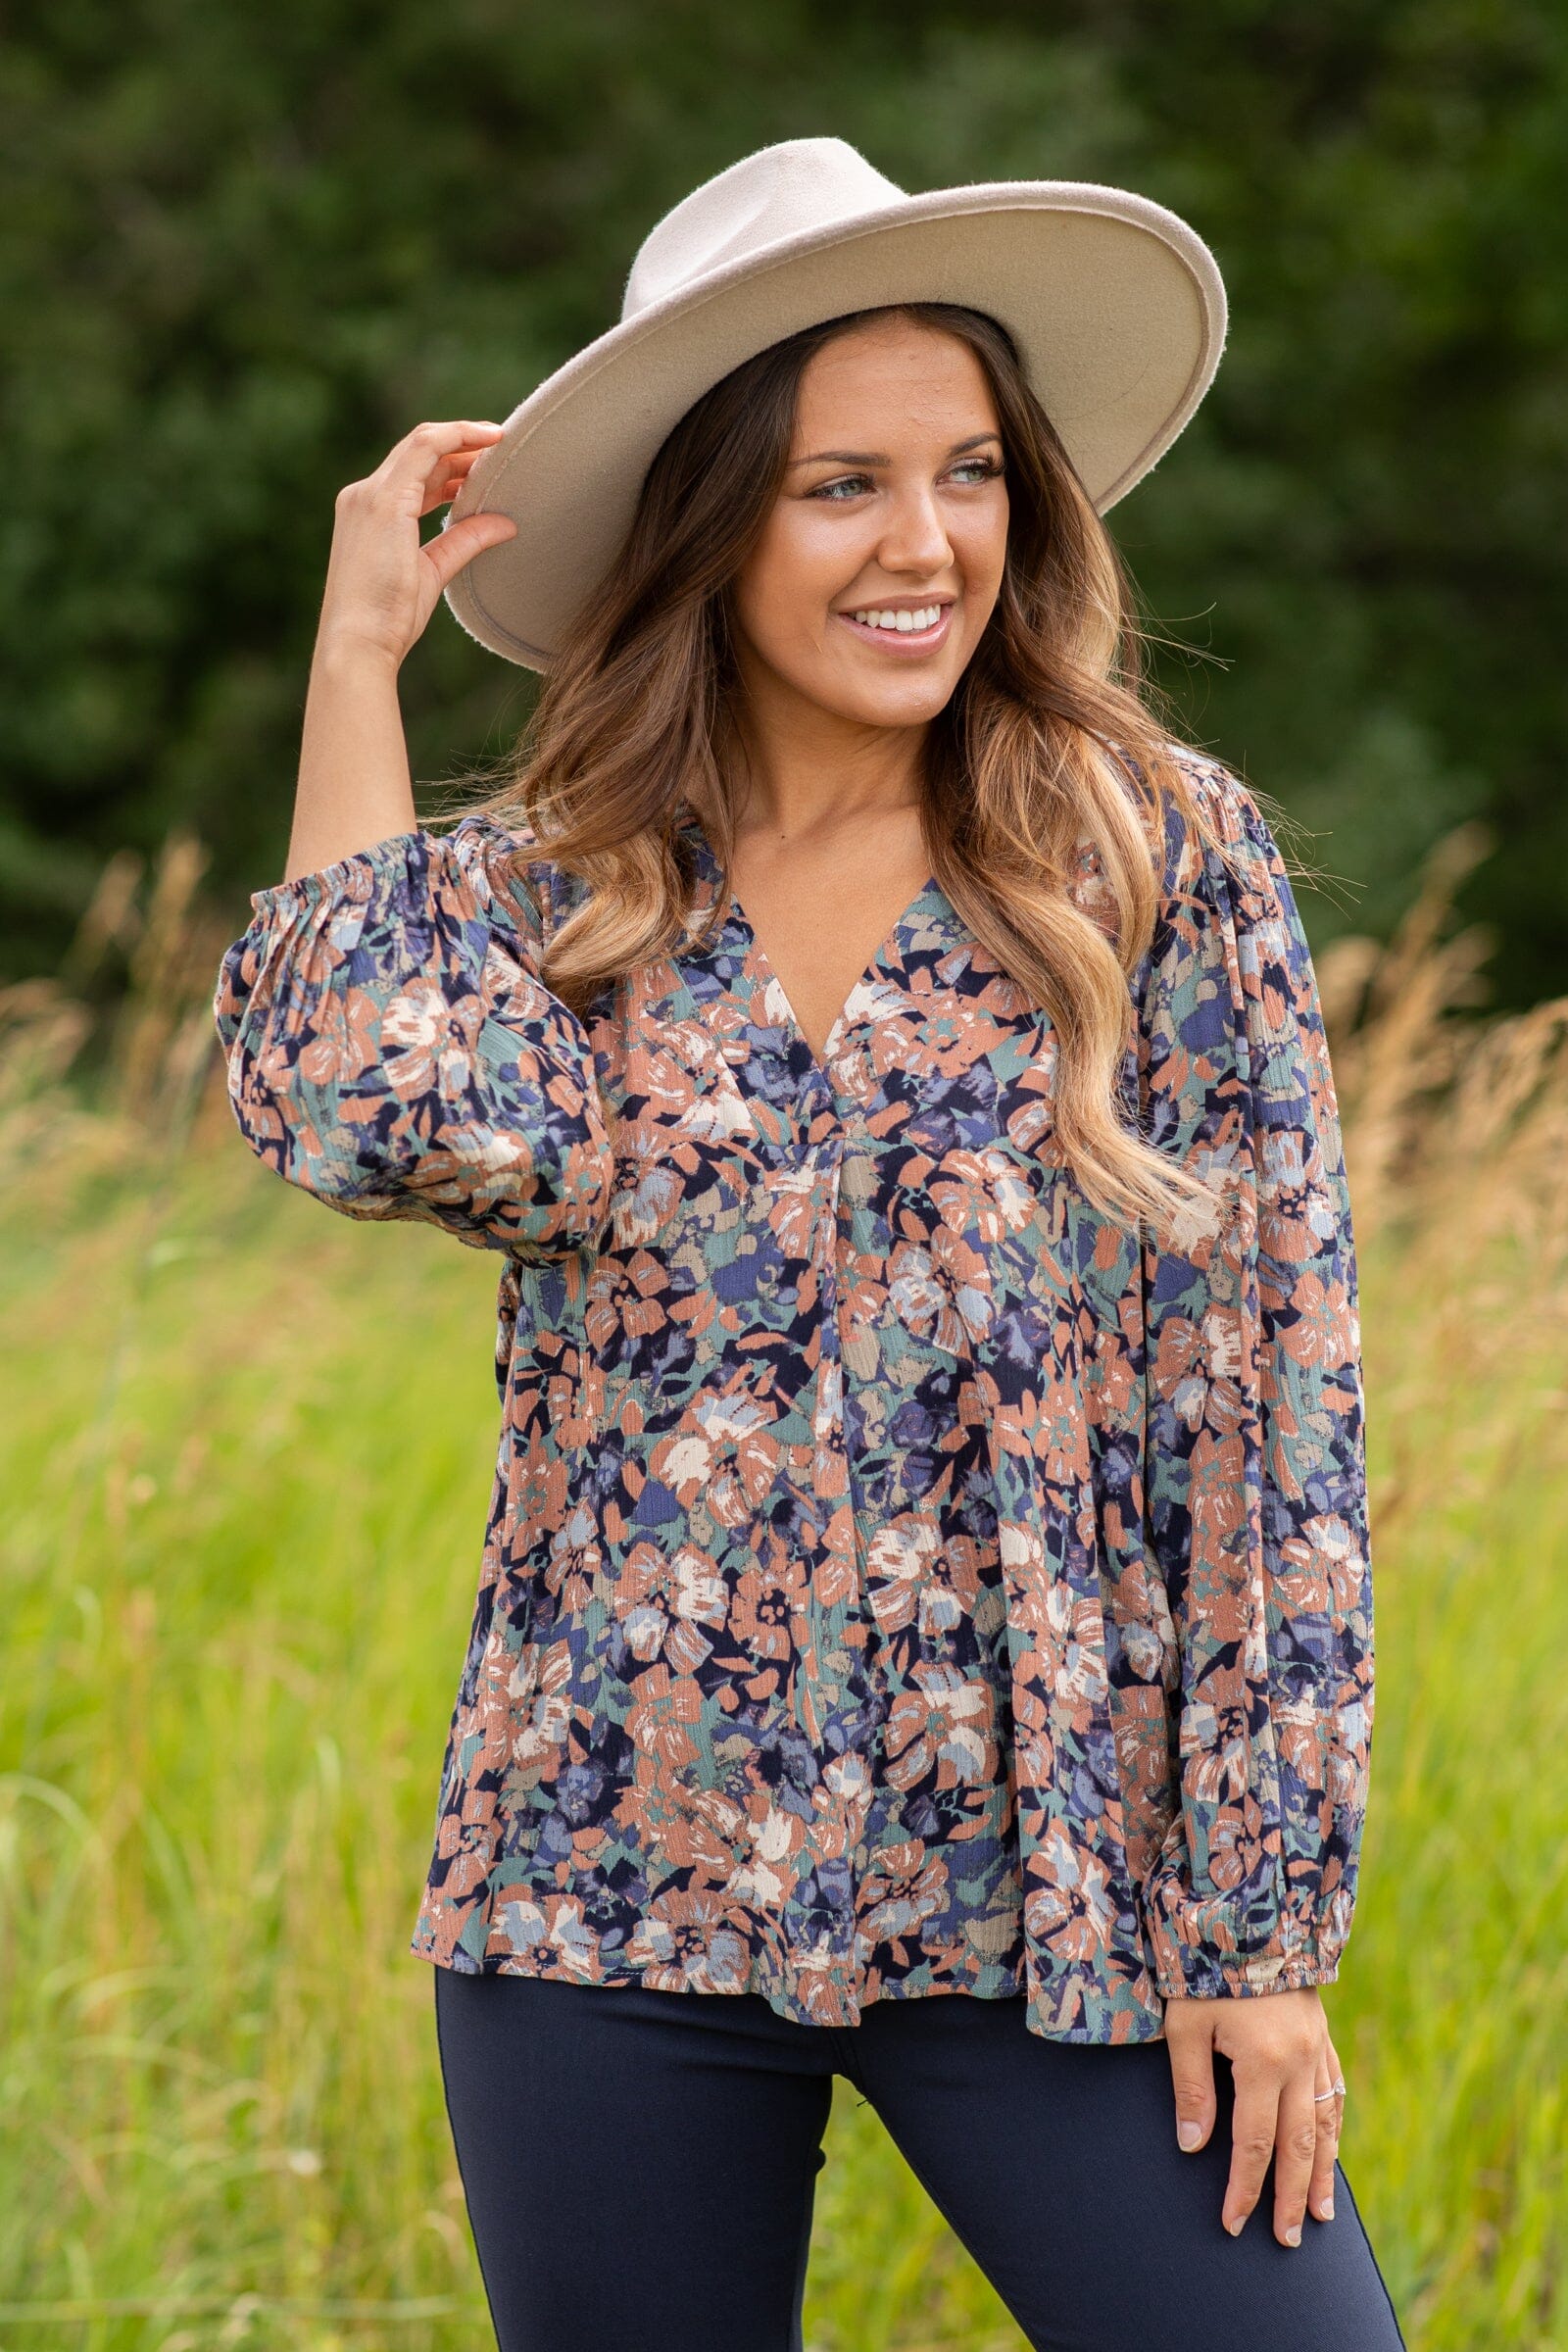 Chestnut and Navy Floral Print Long Sleeve Top - Filly Flair